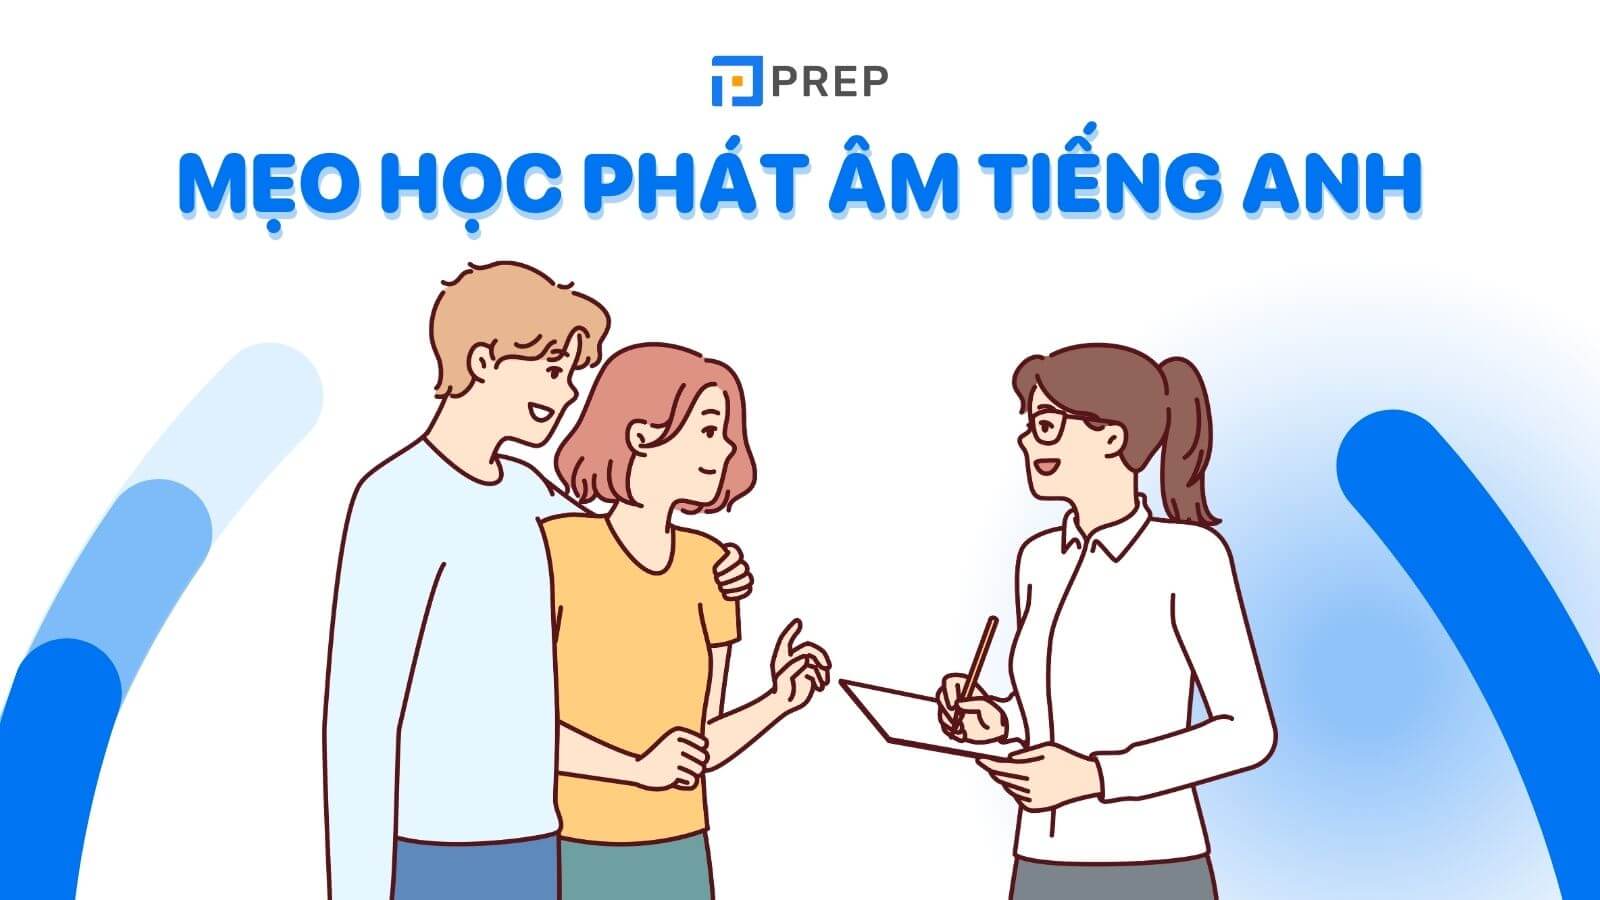 meo-hoc-phat-am-tieng-anh.jpg